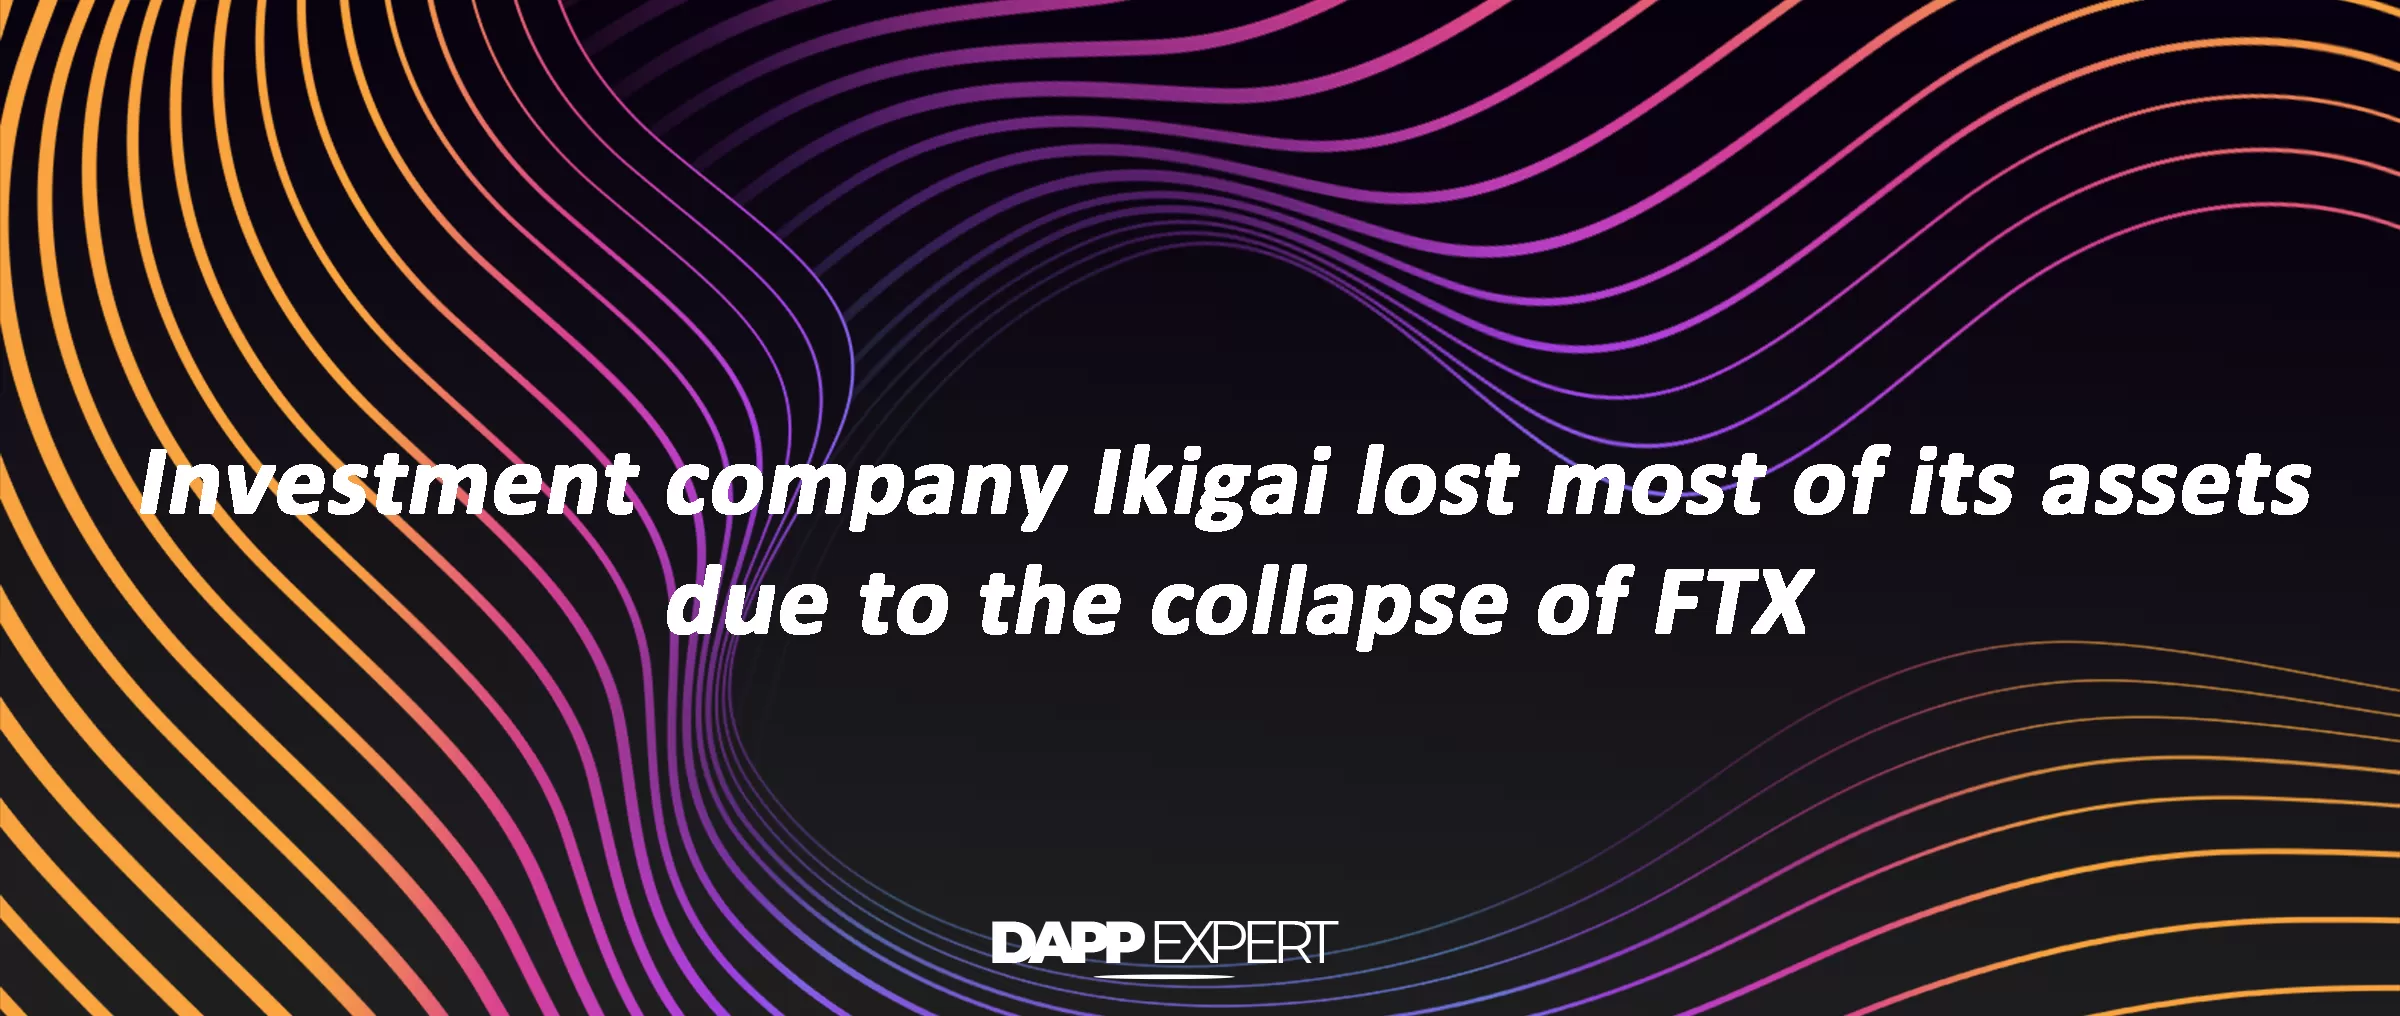 Investment company Ikigai lost most of its assets due to the collapse of FTX